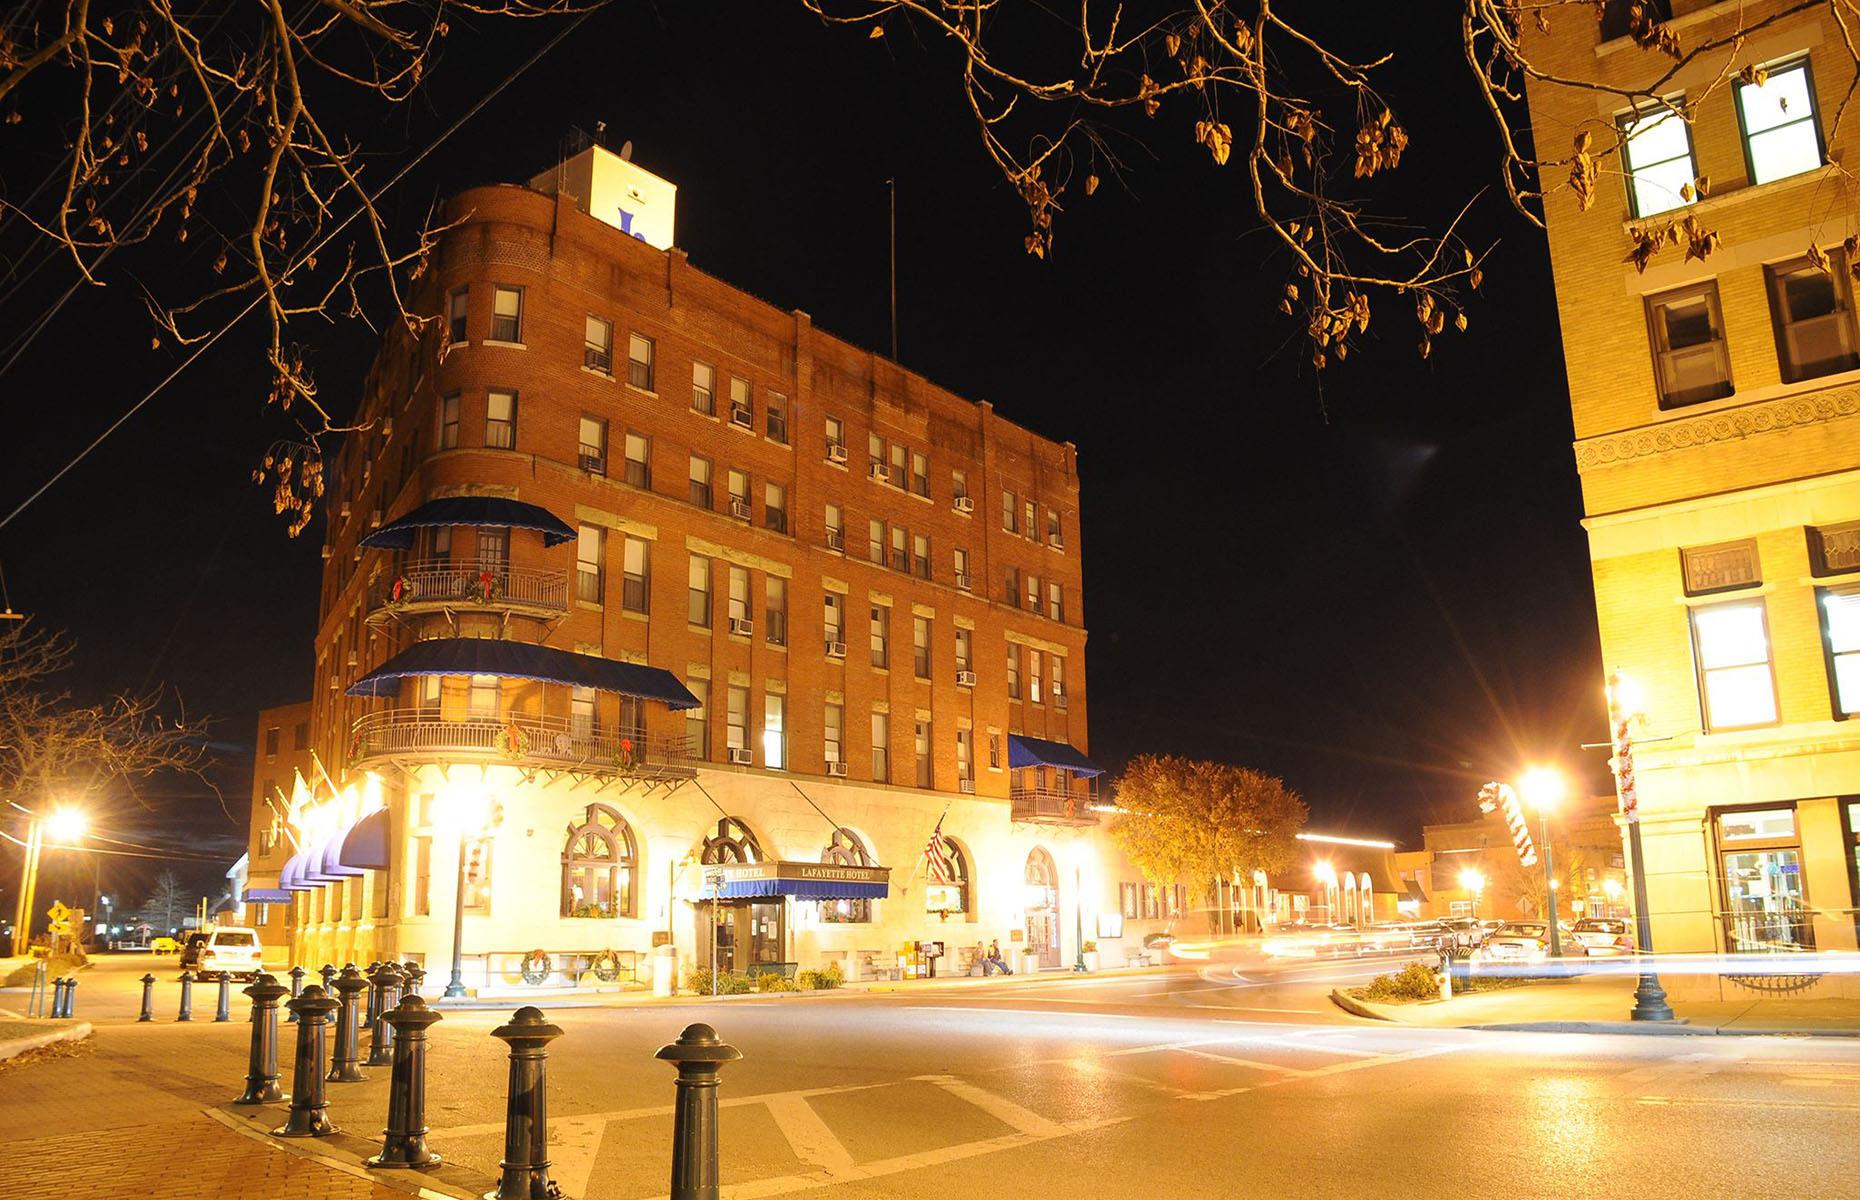 <p>Although many hotels in Ohio claim to be the most haunted in the state, <a href="https://www.booking.com/hotel/us/marietta-101-front-street.en-gb.html?aid=1280739" rel="nofollow” target=">Lafayette Hotel</a> will make the hairs on the back of your neck stand up. The hauntings on the third floor are said to be so severe some of the employees even refuse to go up there. Located in Marietta, known as the first permanent settlement of the Northwest Territory, the hotel dates back to 1918 and is said to be haunted by its former owner. Apparently, he likes to play tricks on guests by relocating items in the room, turning suitcases upside down and emptying shampoo bottles. </p>